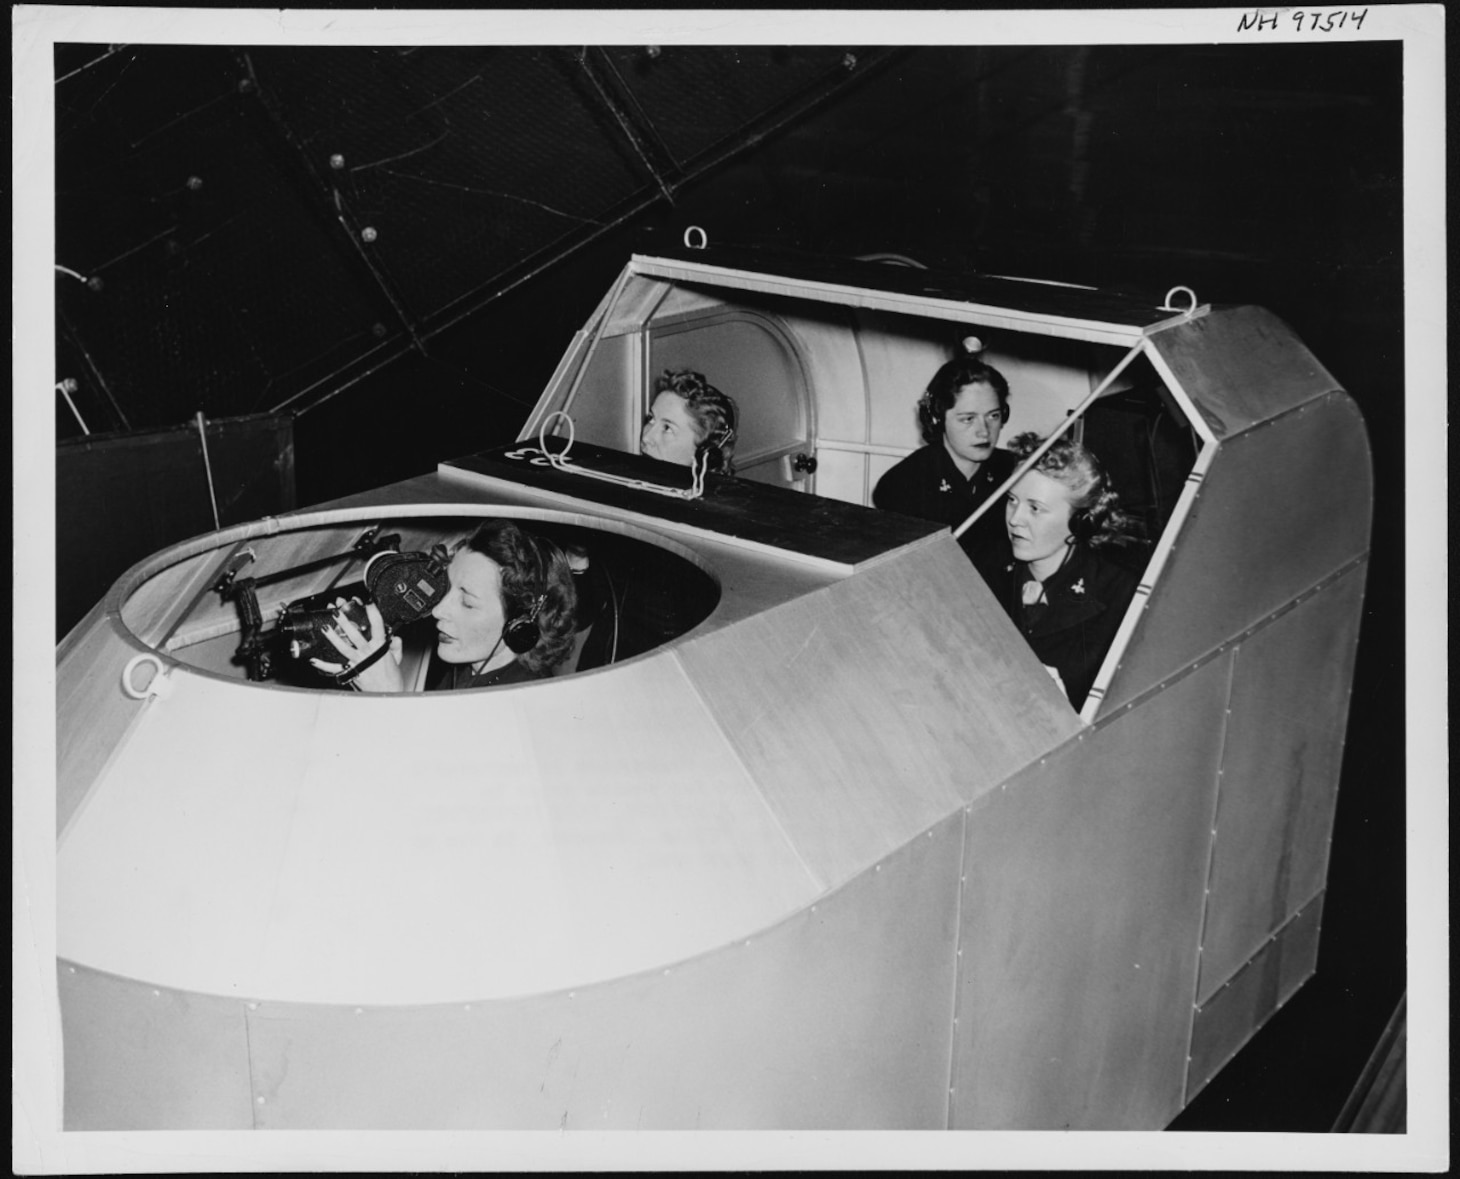 Specialists (Teachers) rotate duties on practice “flights” in the Celestial Navigation Trainer (CNT) on July 23, 1944. These WAVES are attending the 10-week Navy Link Celestial Navigation School located at Naval Air Station Seattle. Pictured (left to right):  Irene Aide, navigator; Linnea Peterson, instructor; Jane Hall, radio operator; and Elinor Johnson, pilot.